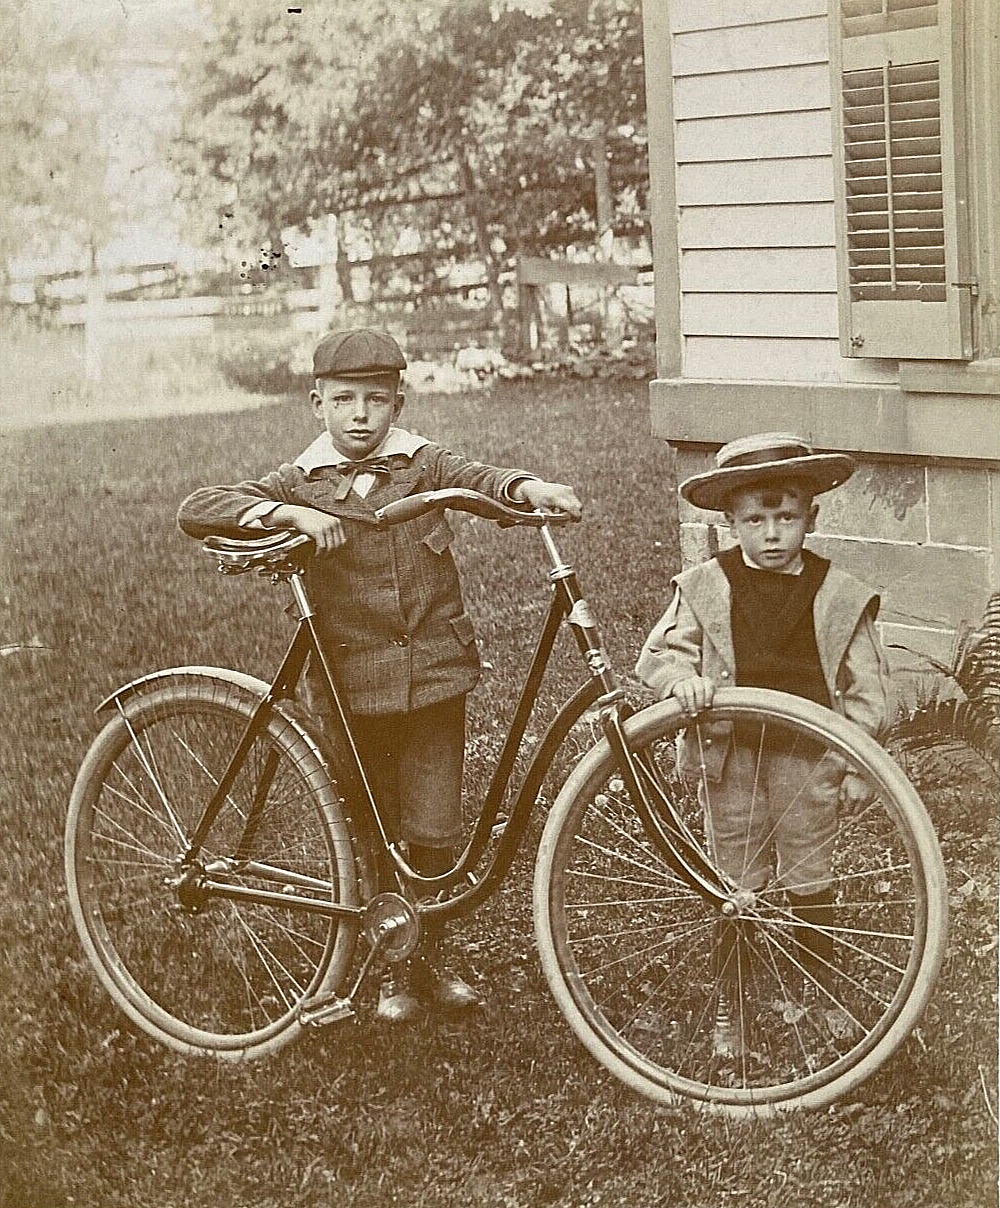 ORIGINAL - WOMEN'S BICYCLE with CHILDREN ID'd PHOTOGRAPH c1890